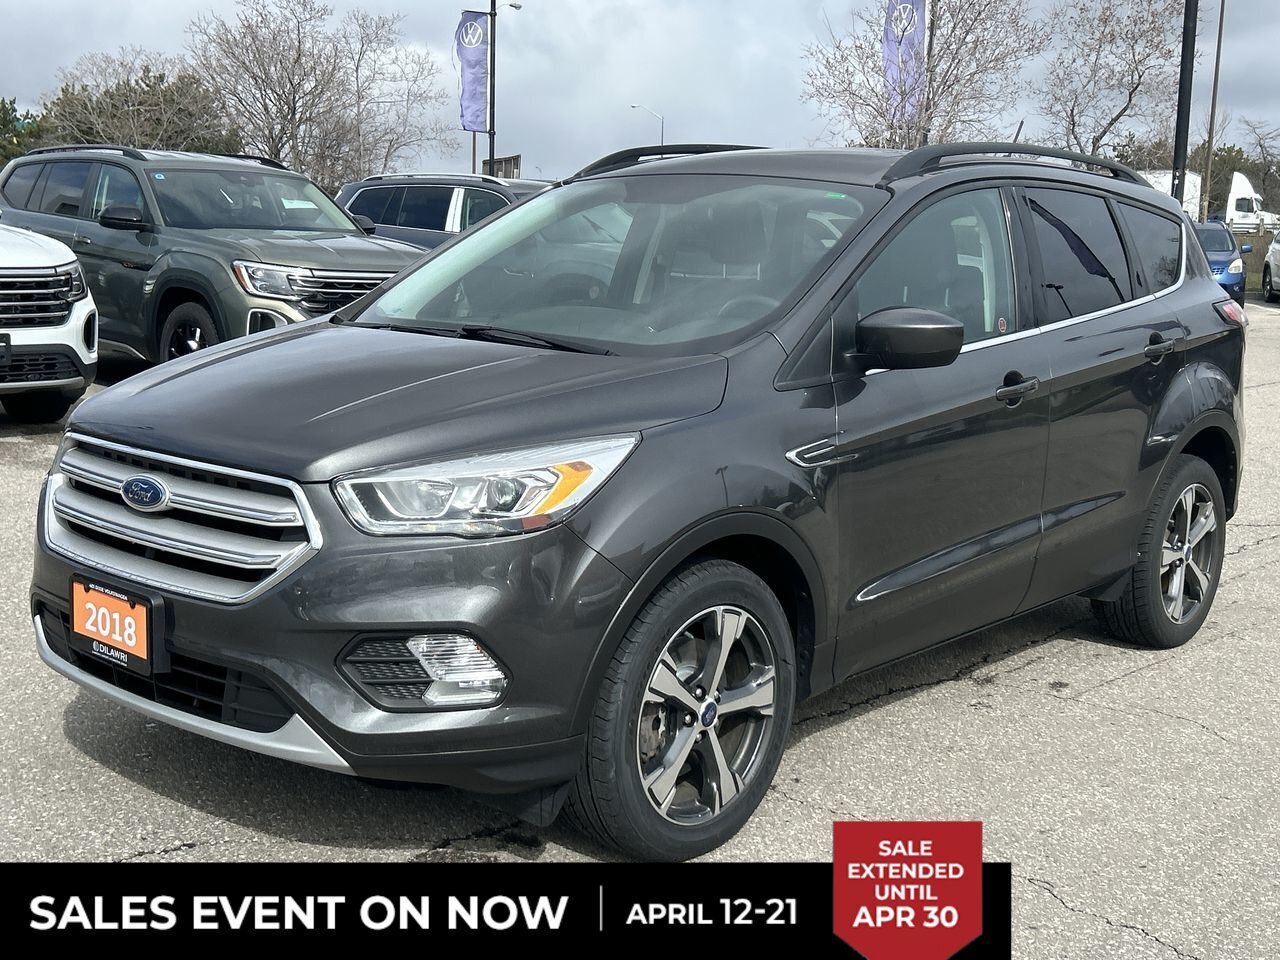 2018 Ford Escape SEL Clean Carfax| AWD| Alloy Wheels| Heated Seats|